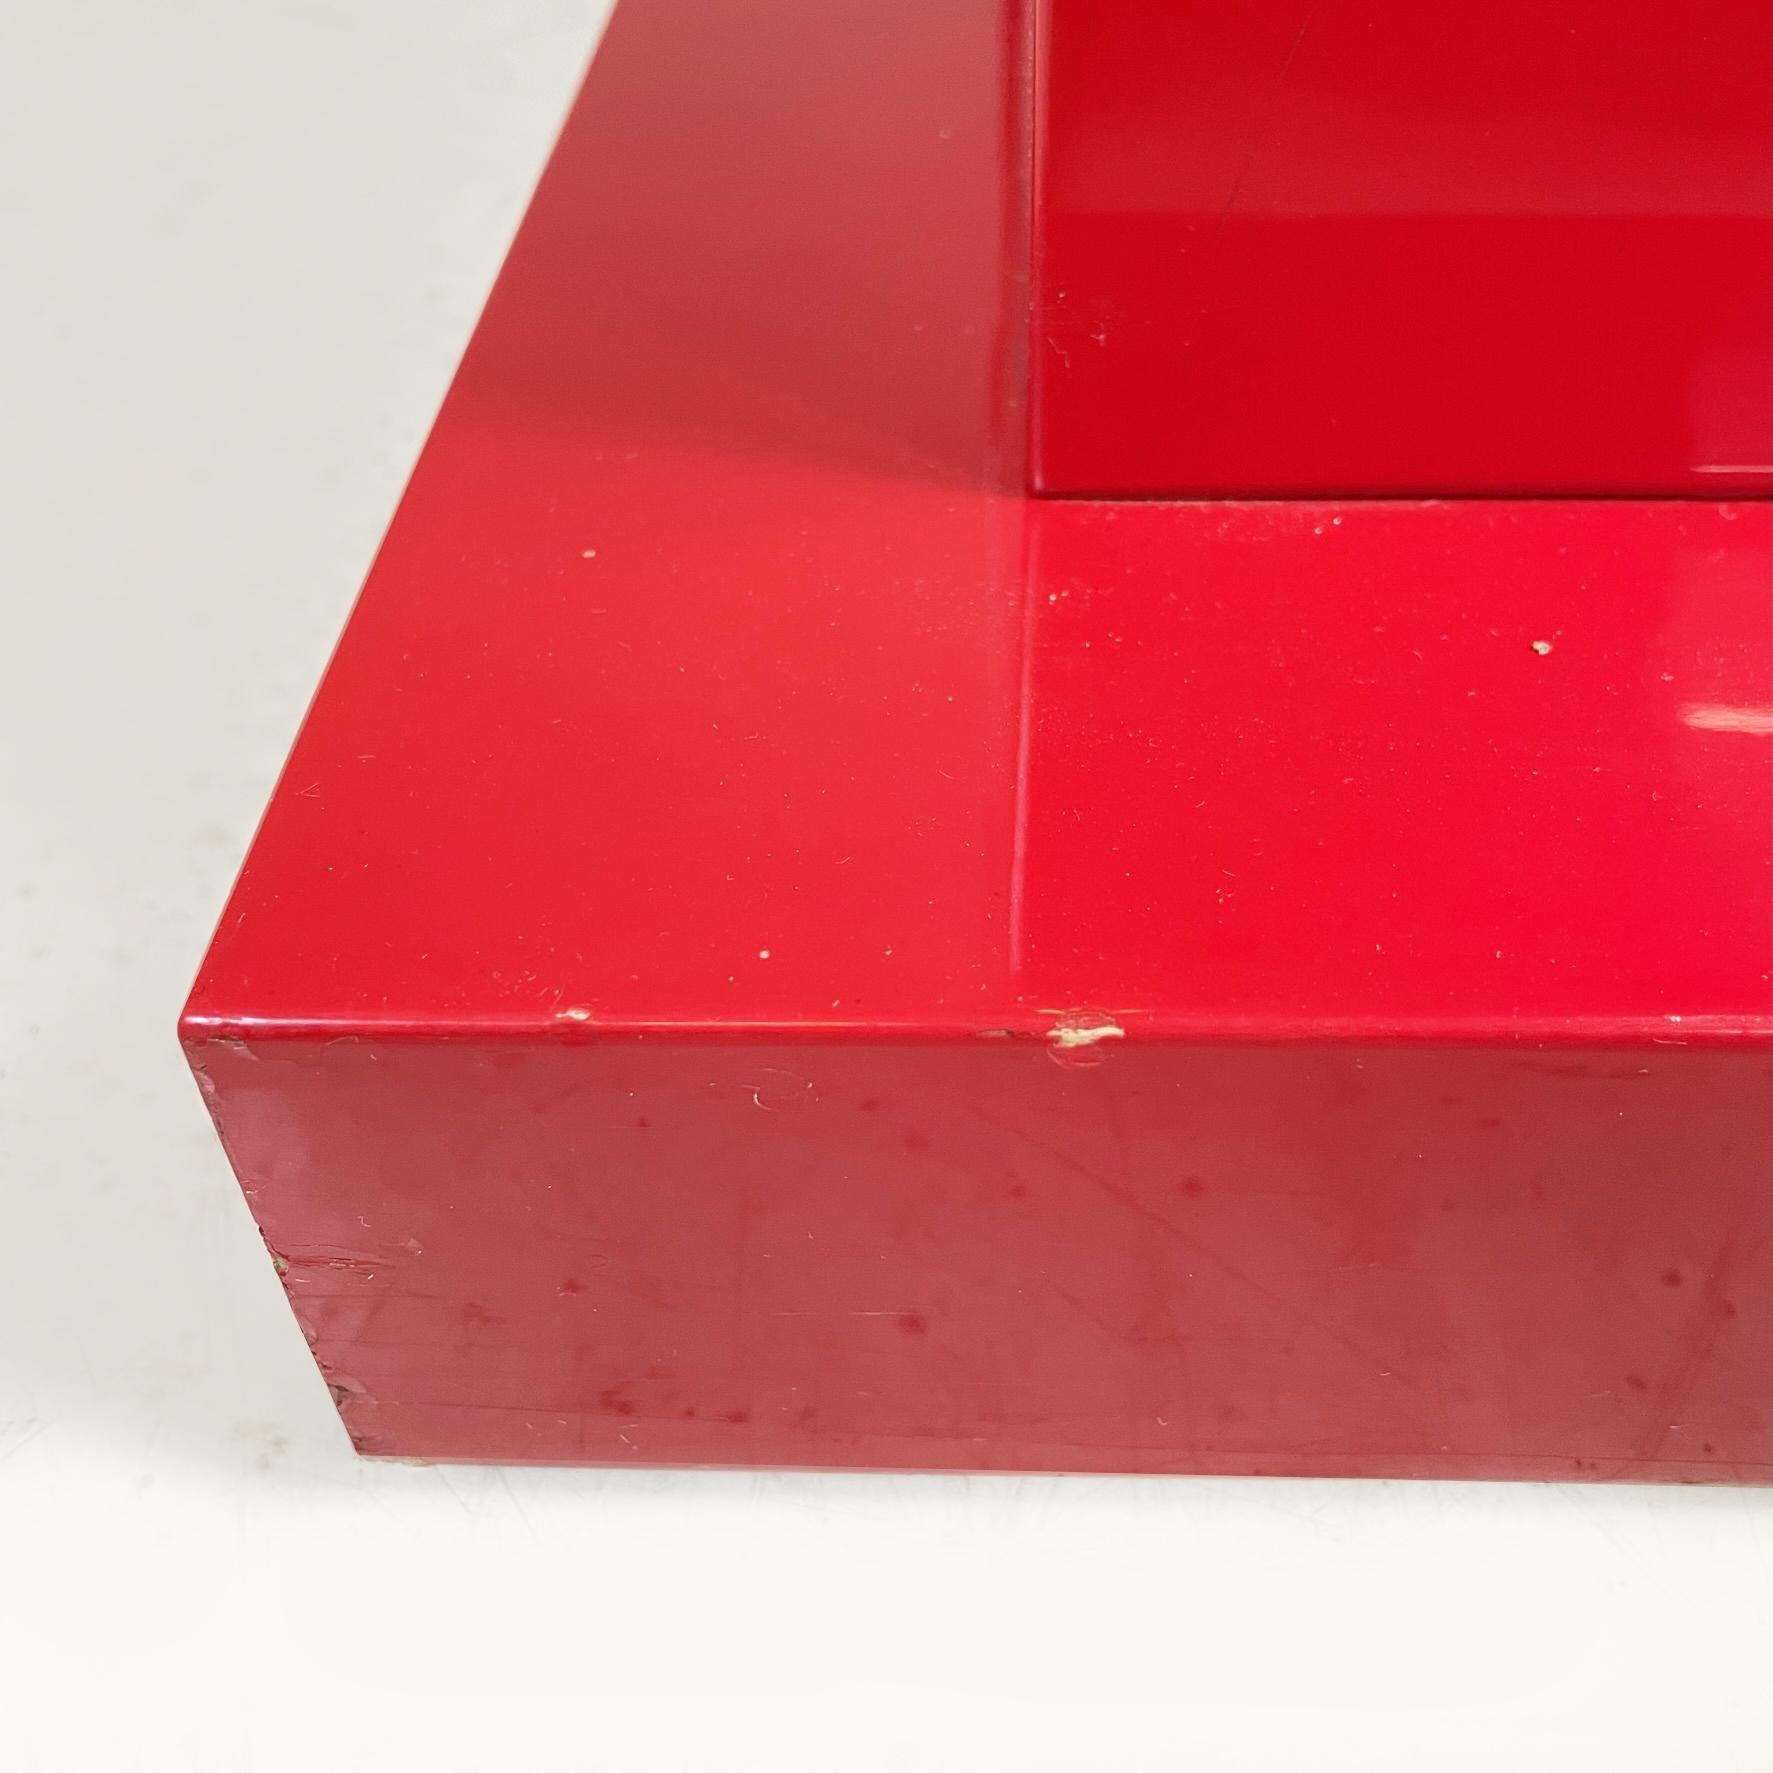 Italian Midcentury Geometric Pedestal in Red Lacquered Wood, 1980s For Sale 6